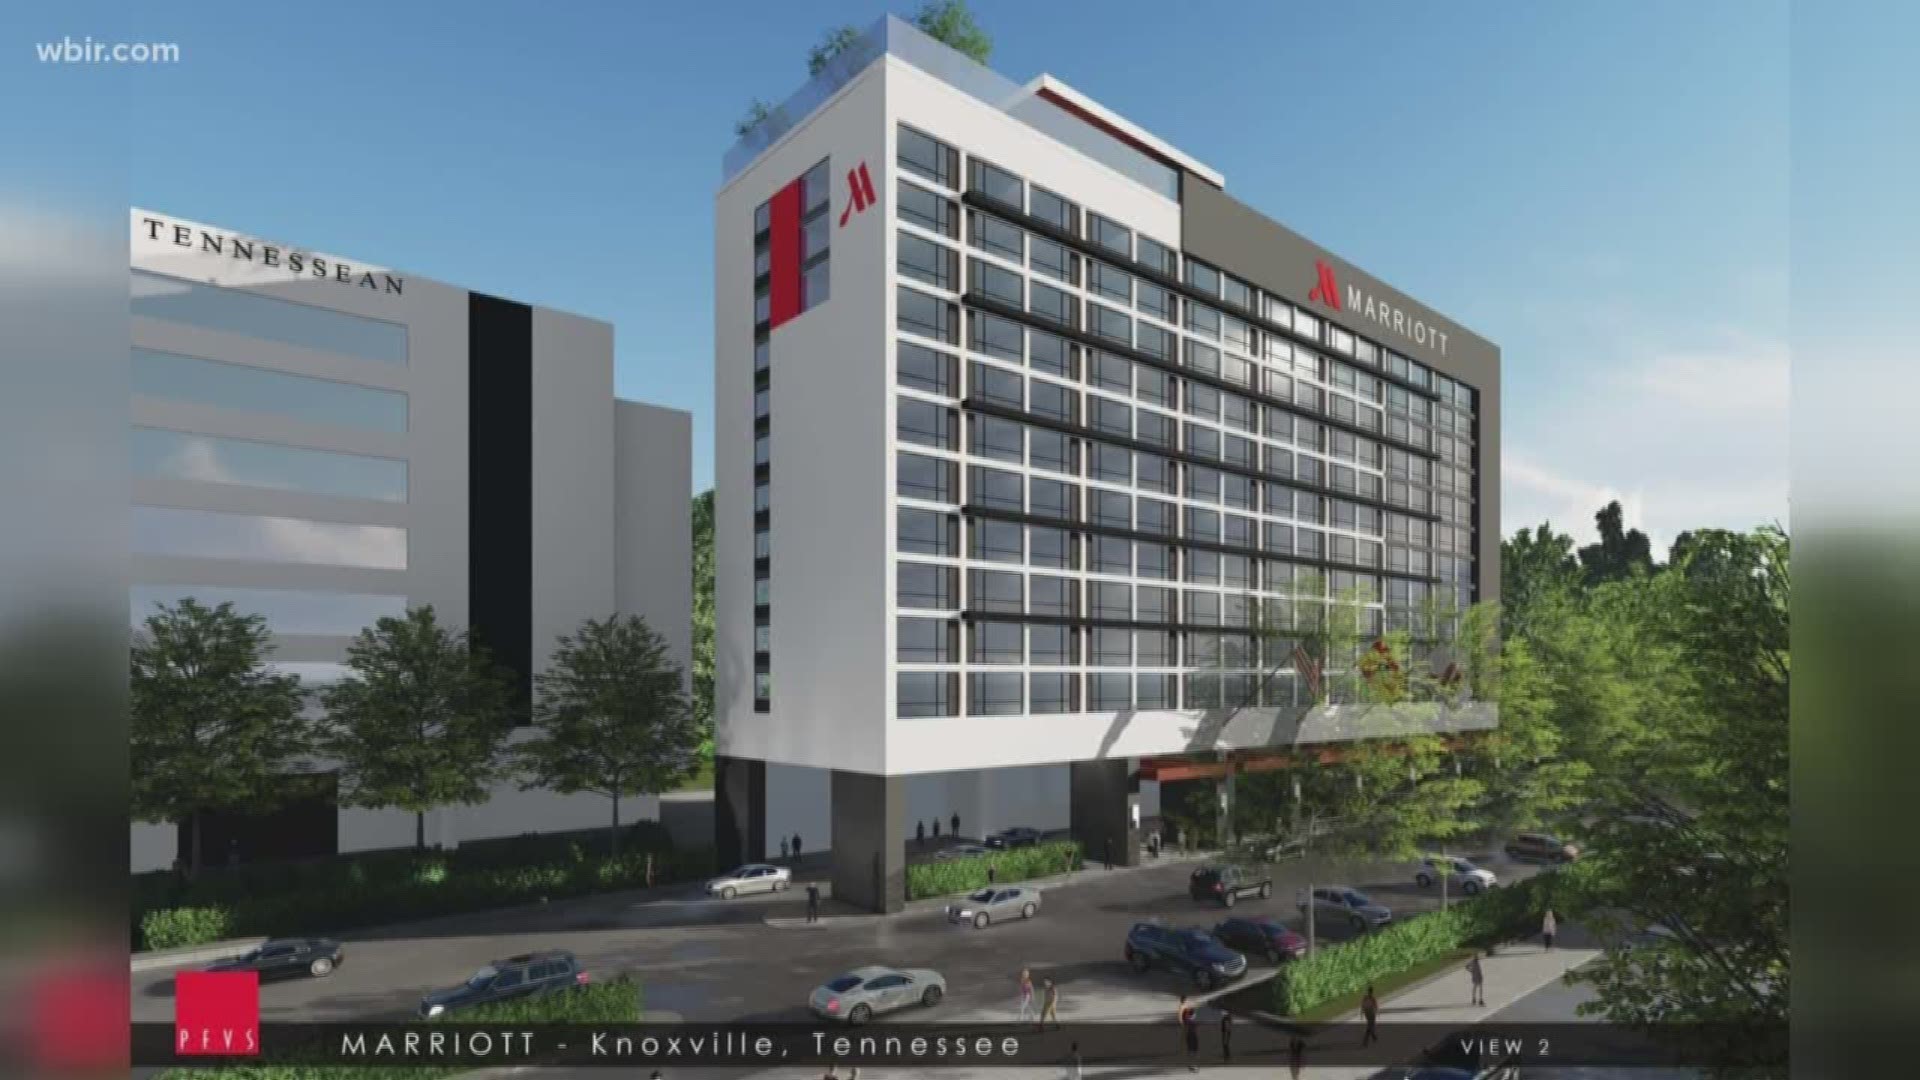 The Knoxville City Council is expected to consider a plan that would replaced the current hotel with a Marriott-branded place to stay.